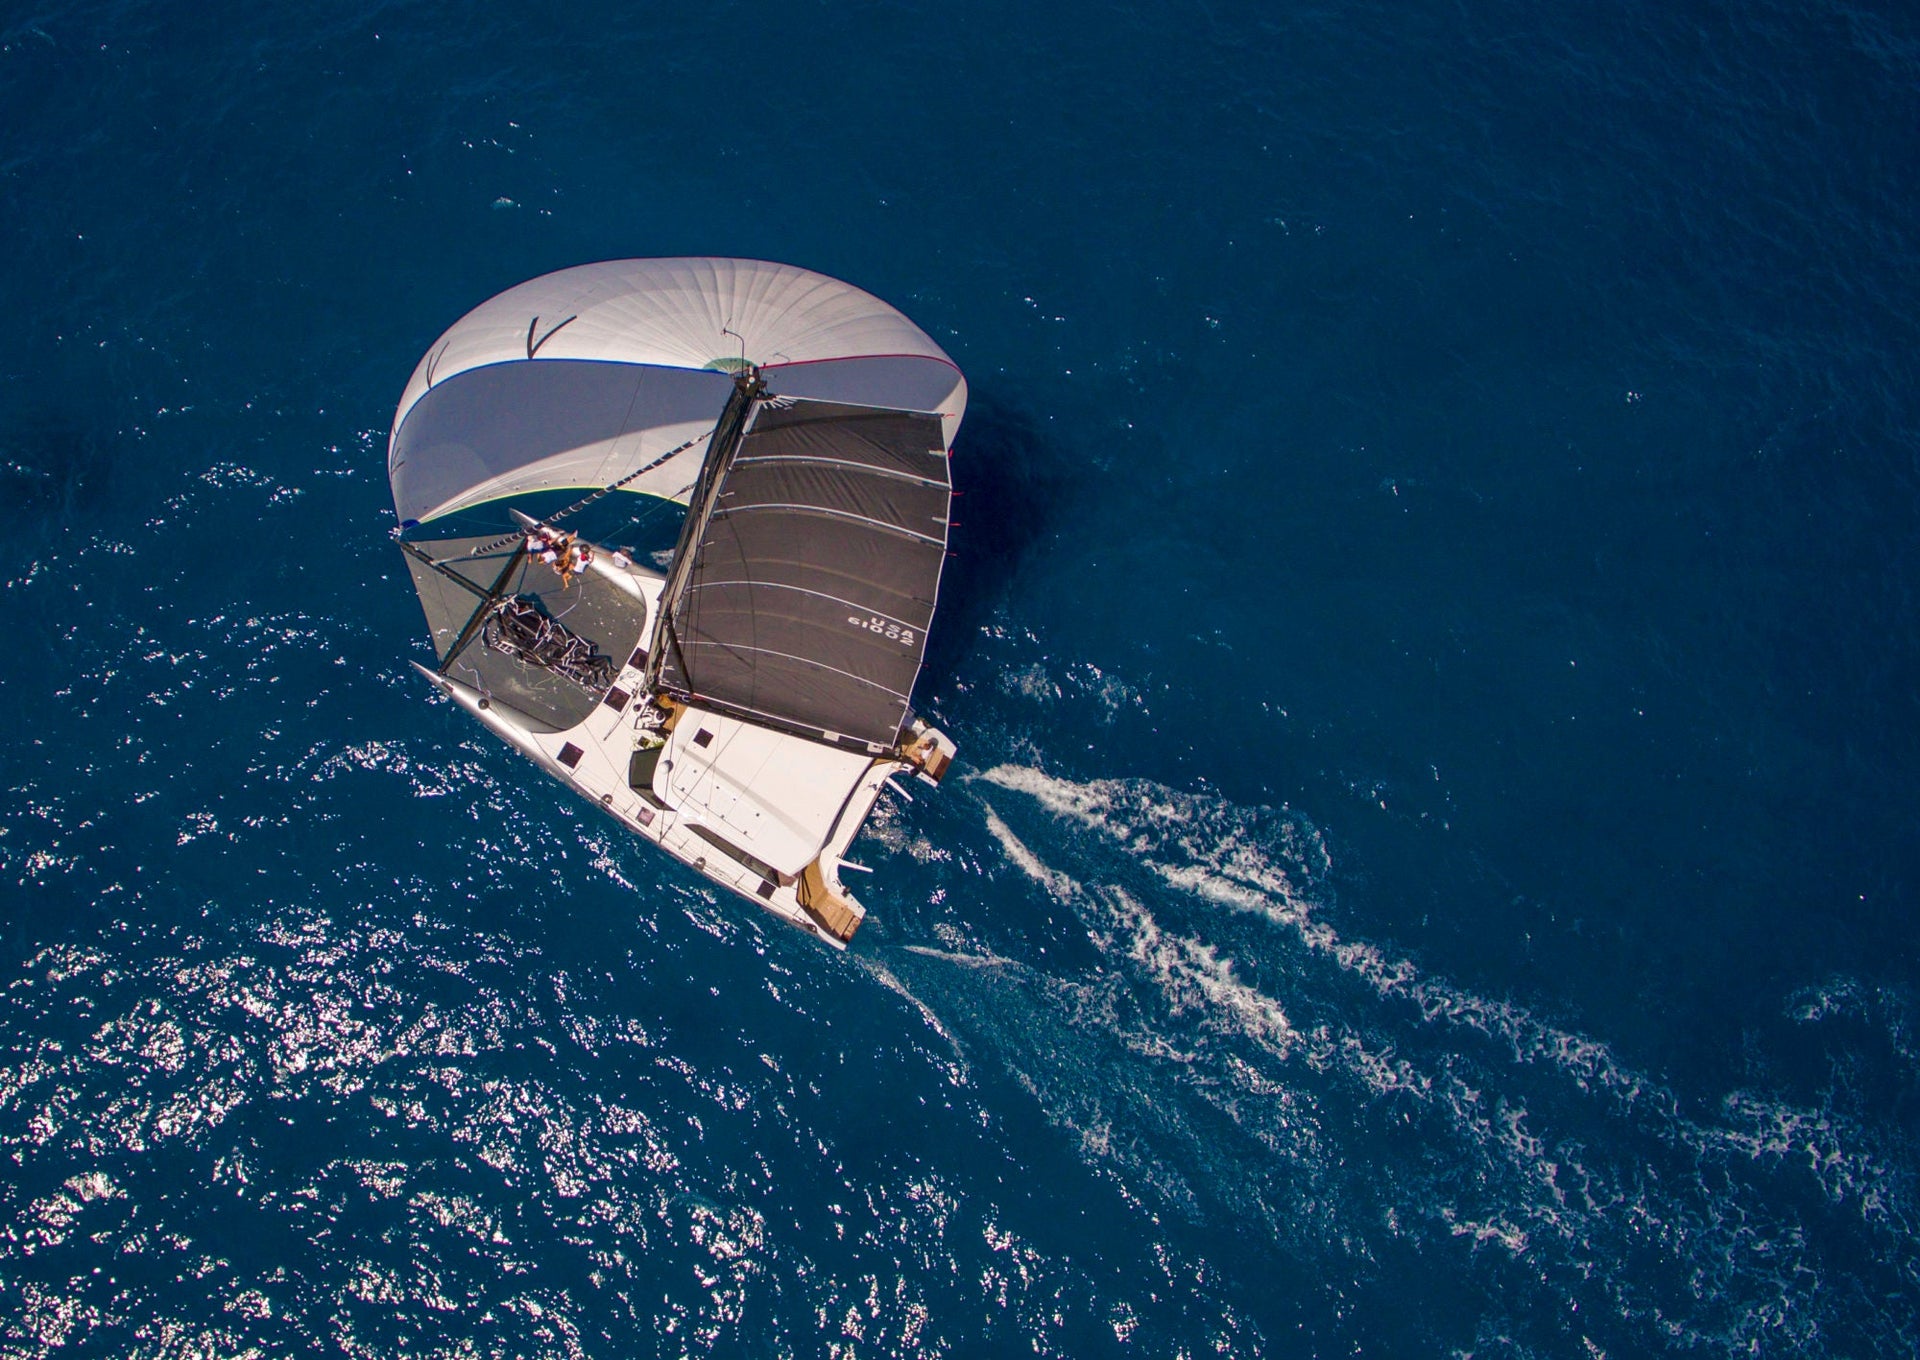 SELECTING THE RIGHT DOWNWIND SAILS FOR YOUR MULTIHULL